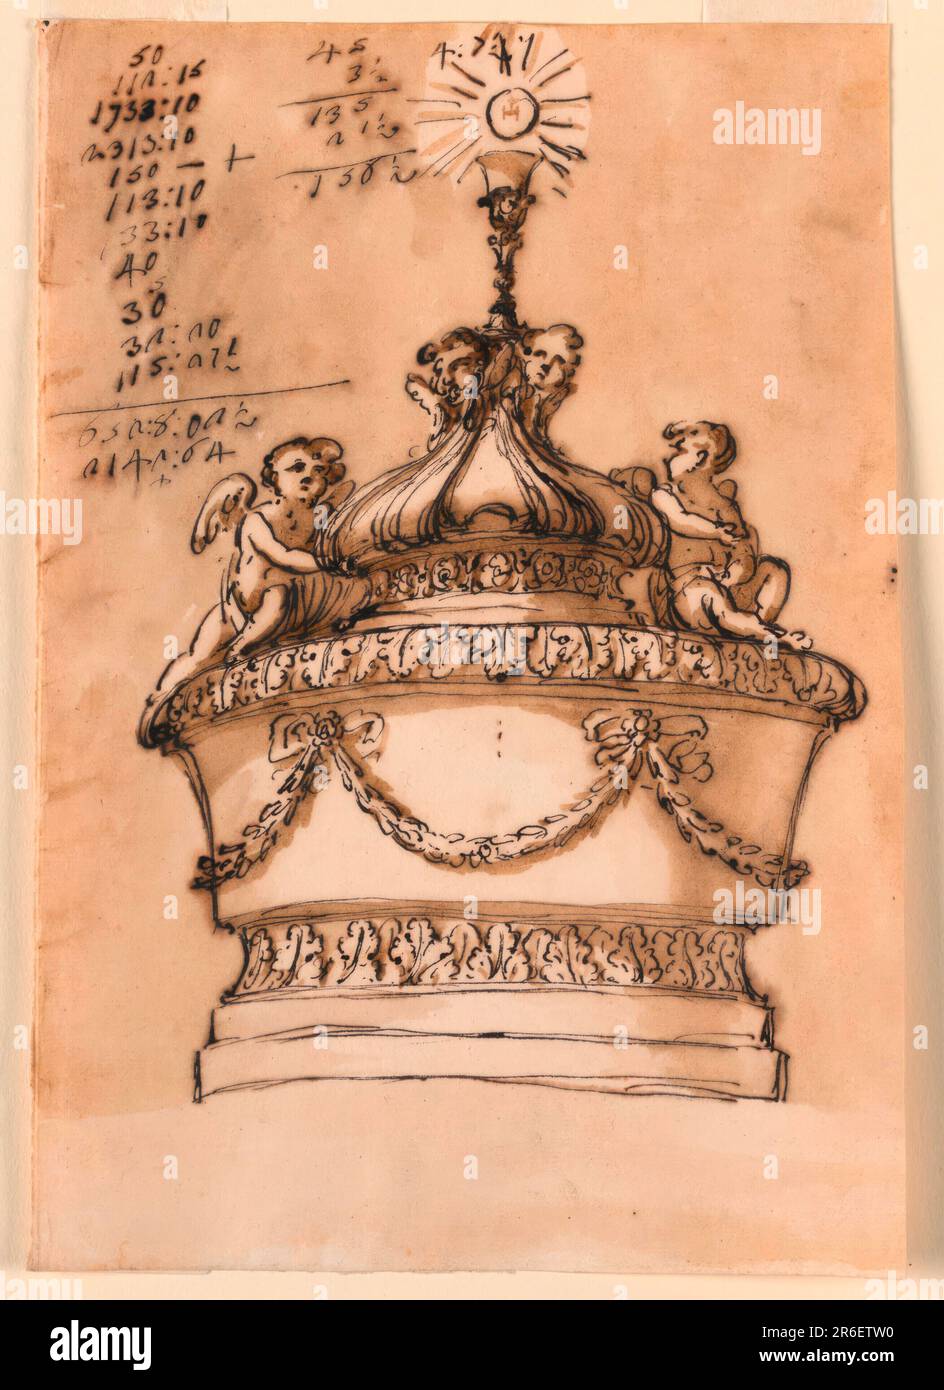 Below are two plinths and a moulding with leaves. The circular bowl is decorated with festoons, supported by bowknots, and the rim with leaves. The rim has the shape of a short onion cupola, with, above visible, two cherubim supporting a chalice with a host hovering above it. Two angels sit beside the cupola. Usual background. Date: ca. 1775. Pen and brown ink, brush and brown wash on lined off-white laid paper. Museum: Cooper Hewitt, Smithsonian Design Museum. Stock Photo